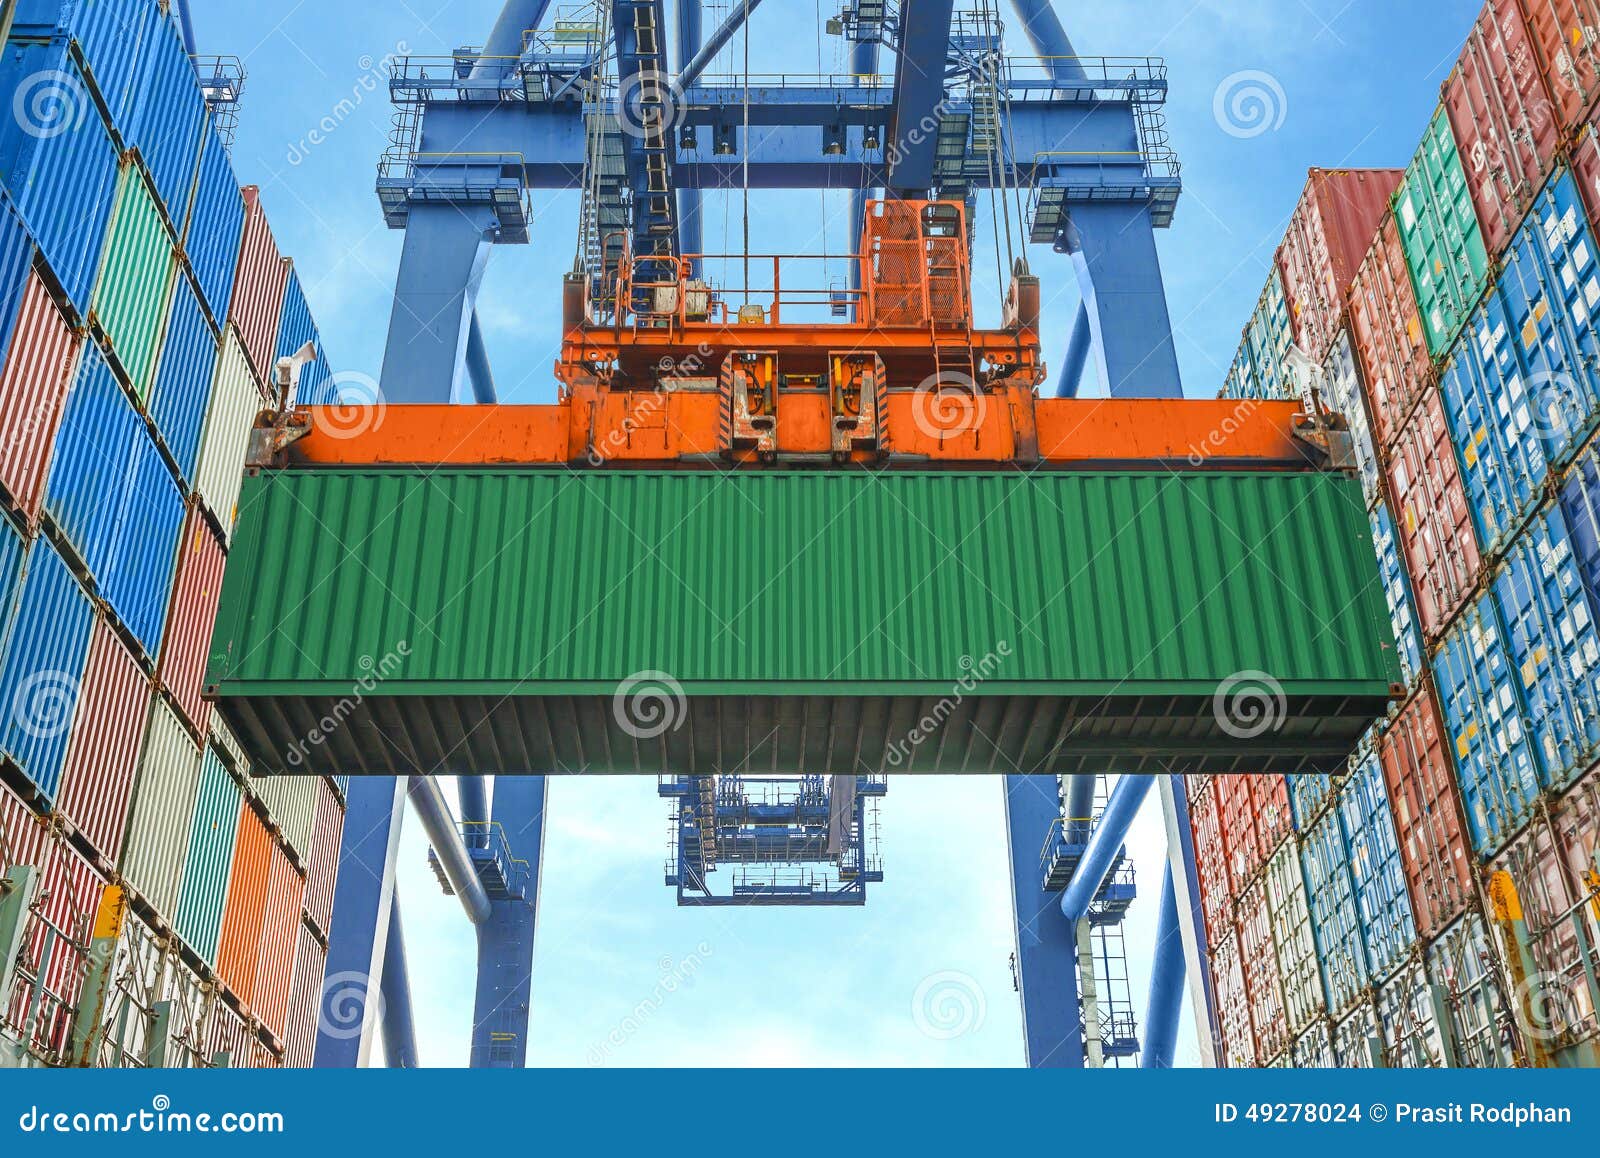 shore crane loading containers in freight ship